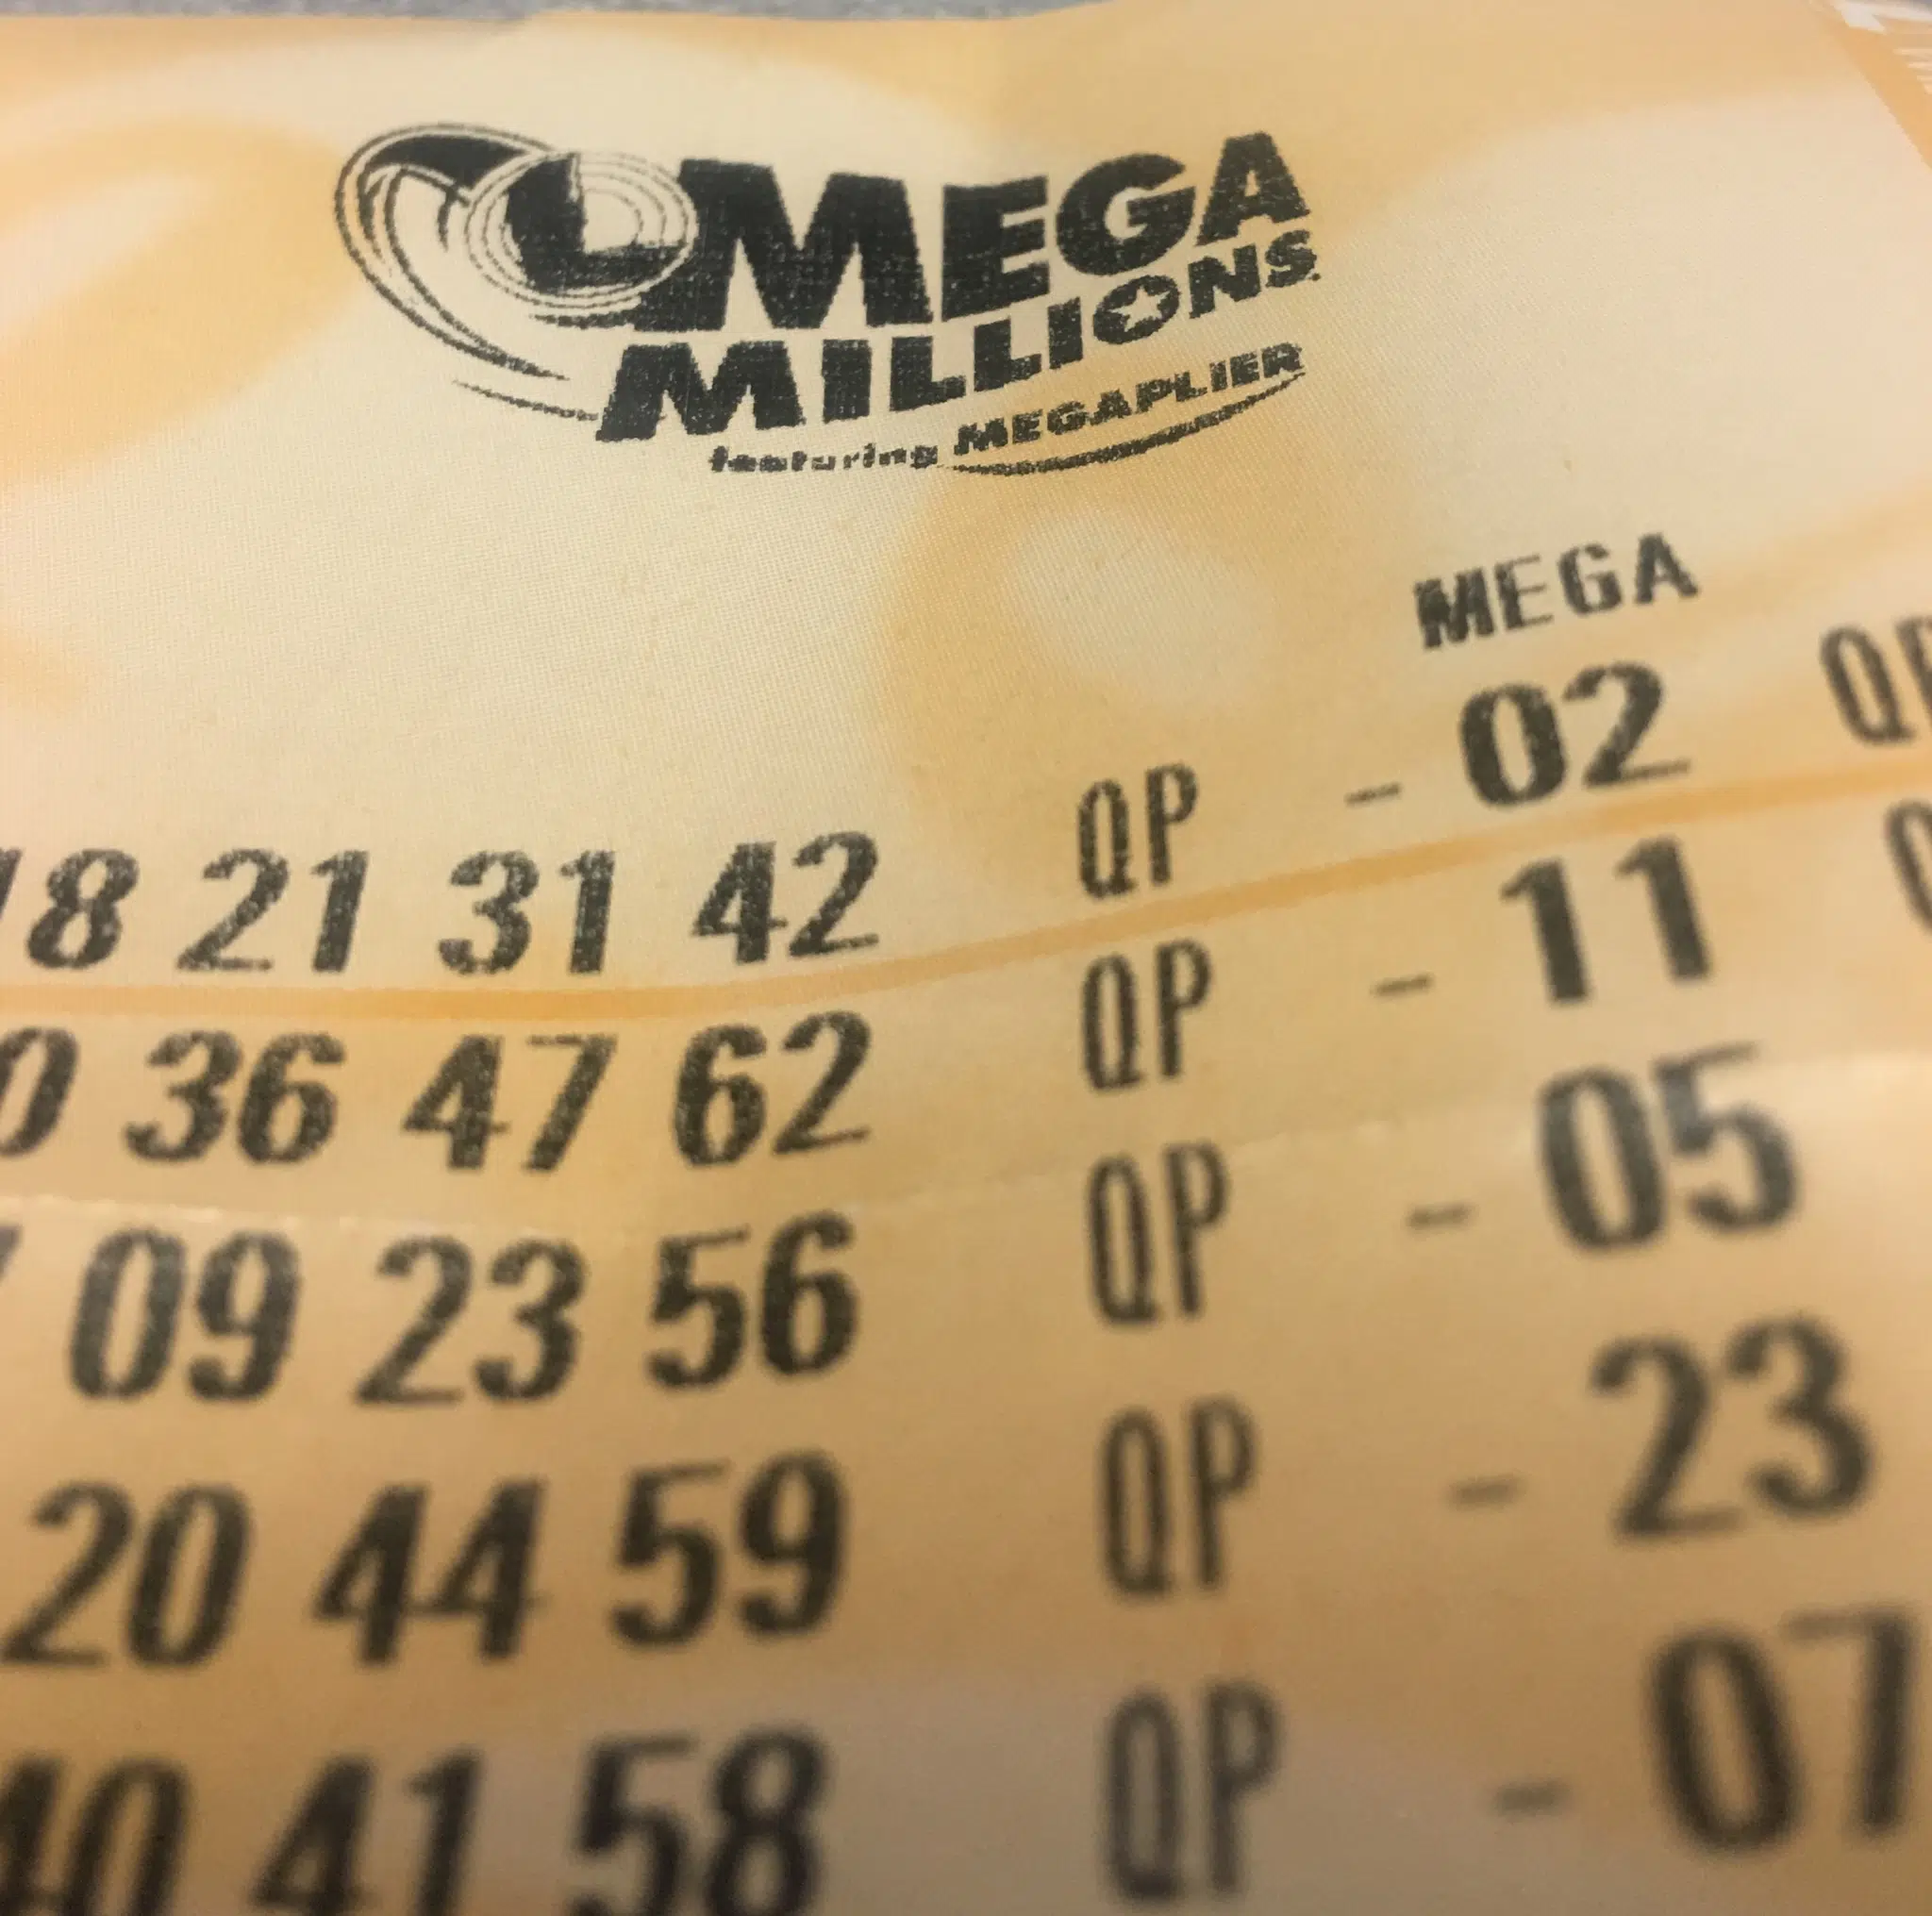 Winning Mega Millions Ticket was Sold, According to Lottery Office